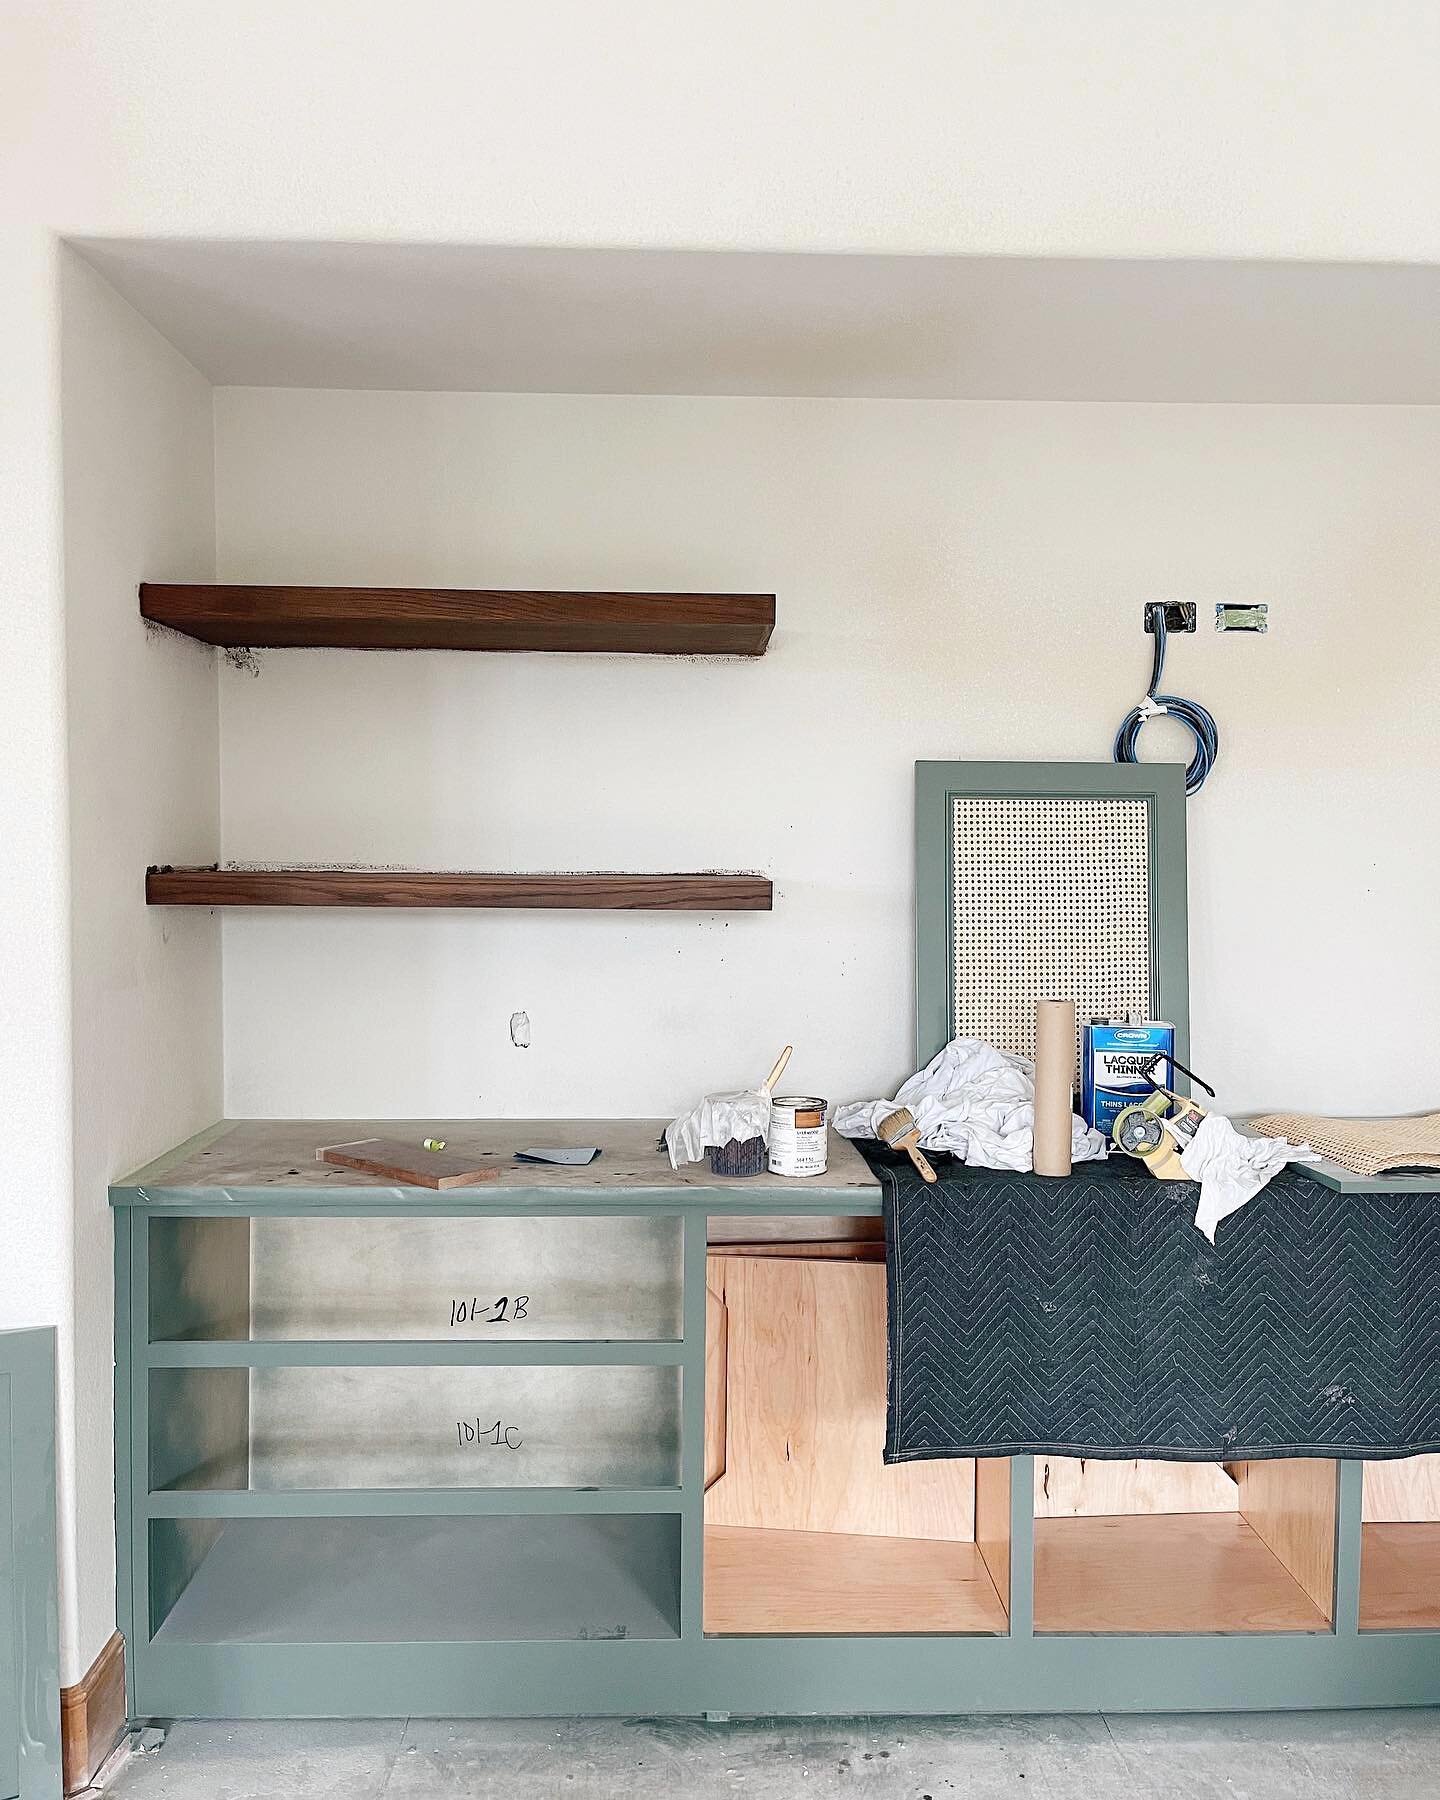 Still a work in progress, but we&rsquo;re getting there! 🤍 See more updates in my stories&hellip; 🛠 #austinitehome